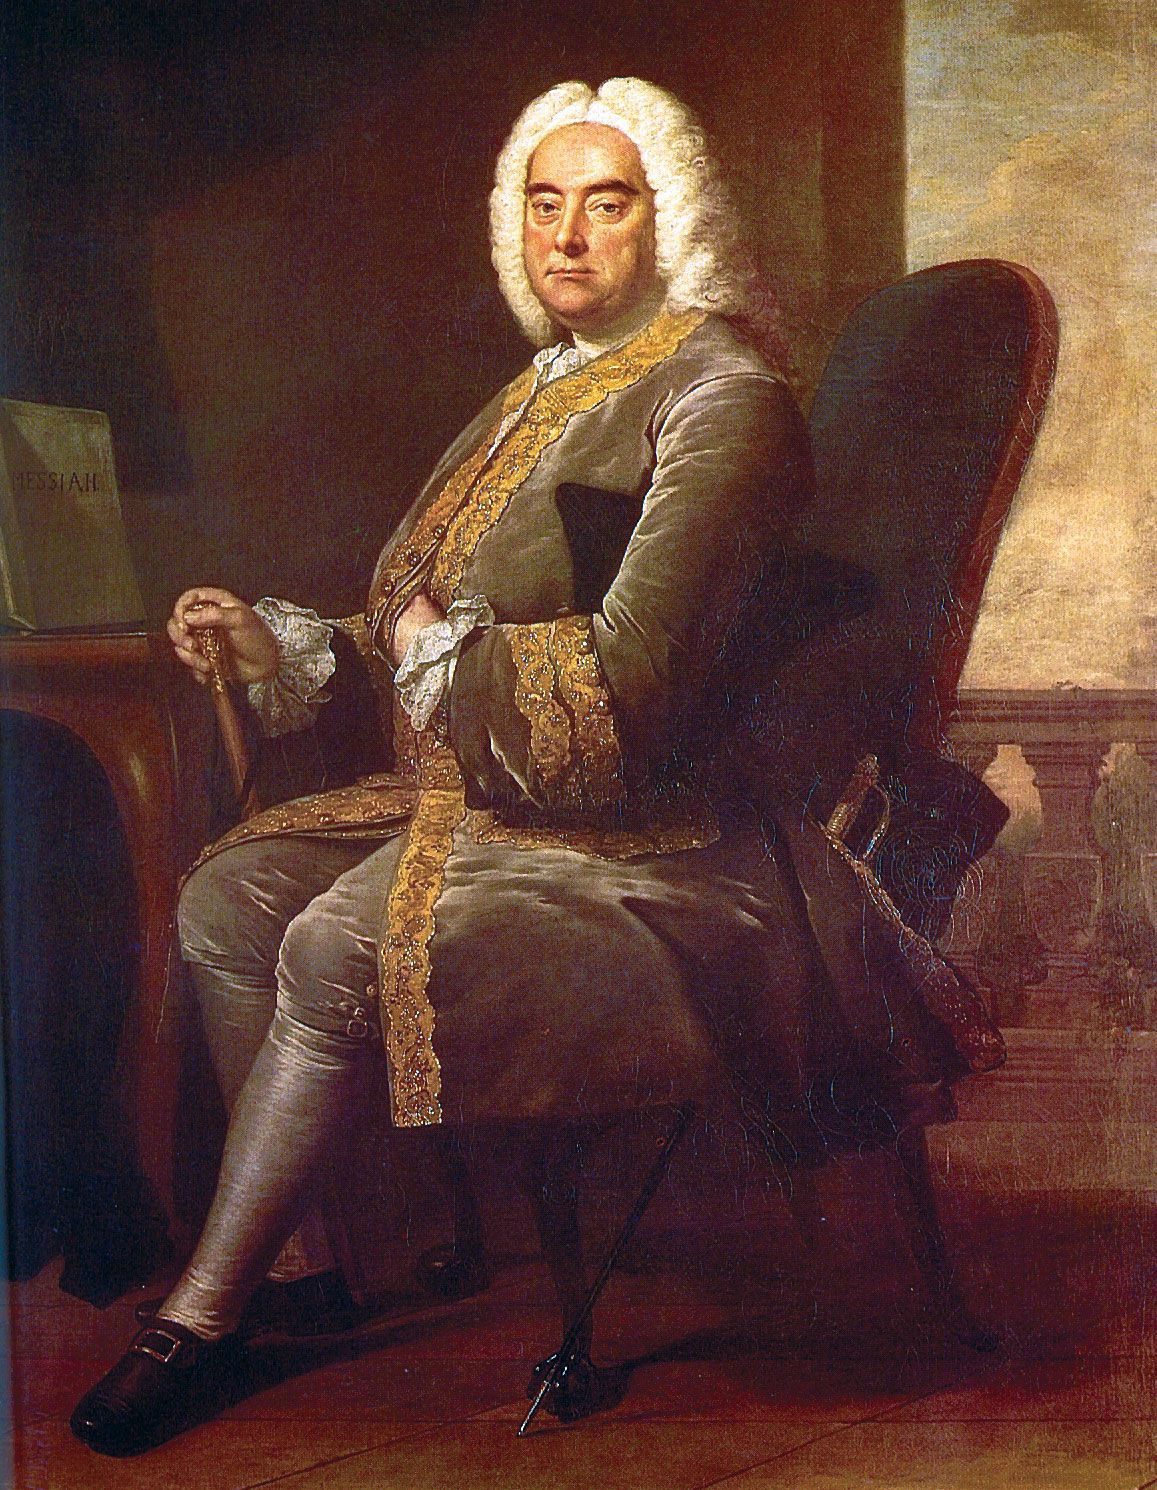 Handel, blind, seated with his score to Messiah